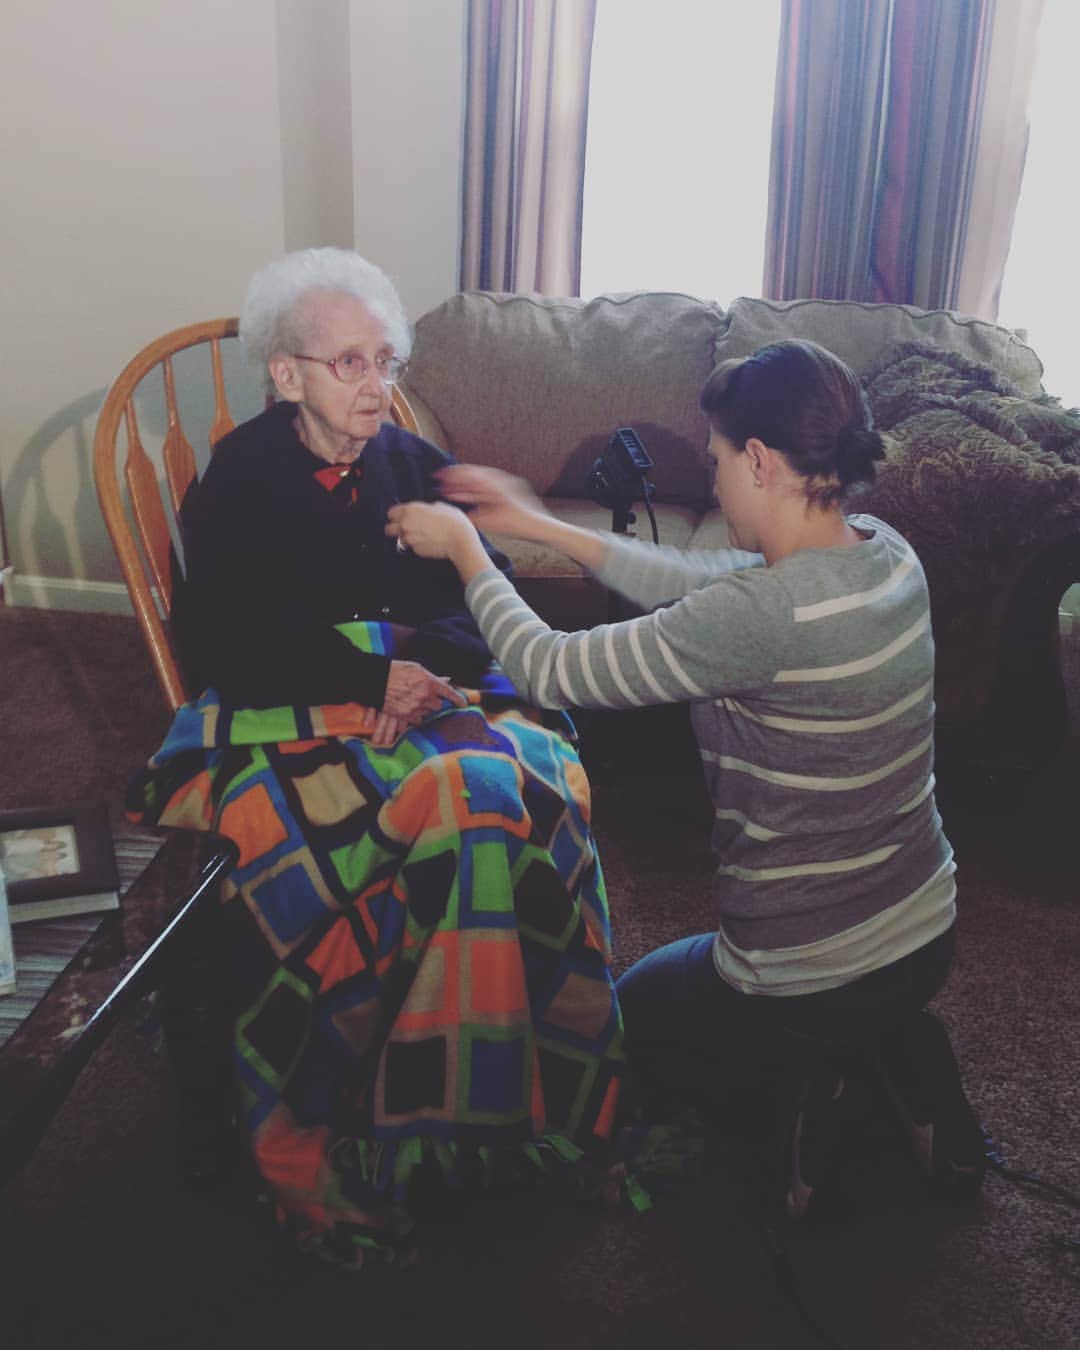 Grandma Bettyのインスタグラム：「It was 4 YEARS AGO today that @sarahhaeberle and the @wdrb_news crew aired Grandma Betty's story on TV, thanks to our family friend Monica! ❤ We wanted to say thank you to Sarah, the news crew, and also all of the followers for such awesome support, so PLEASE say a quick thank you to them and tag them below!!! ❤❤❤」